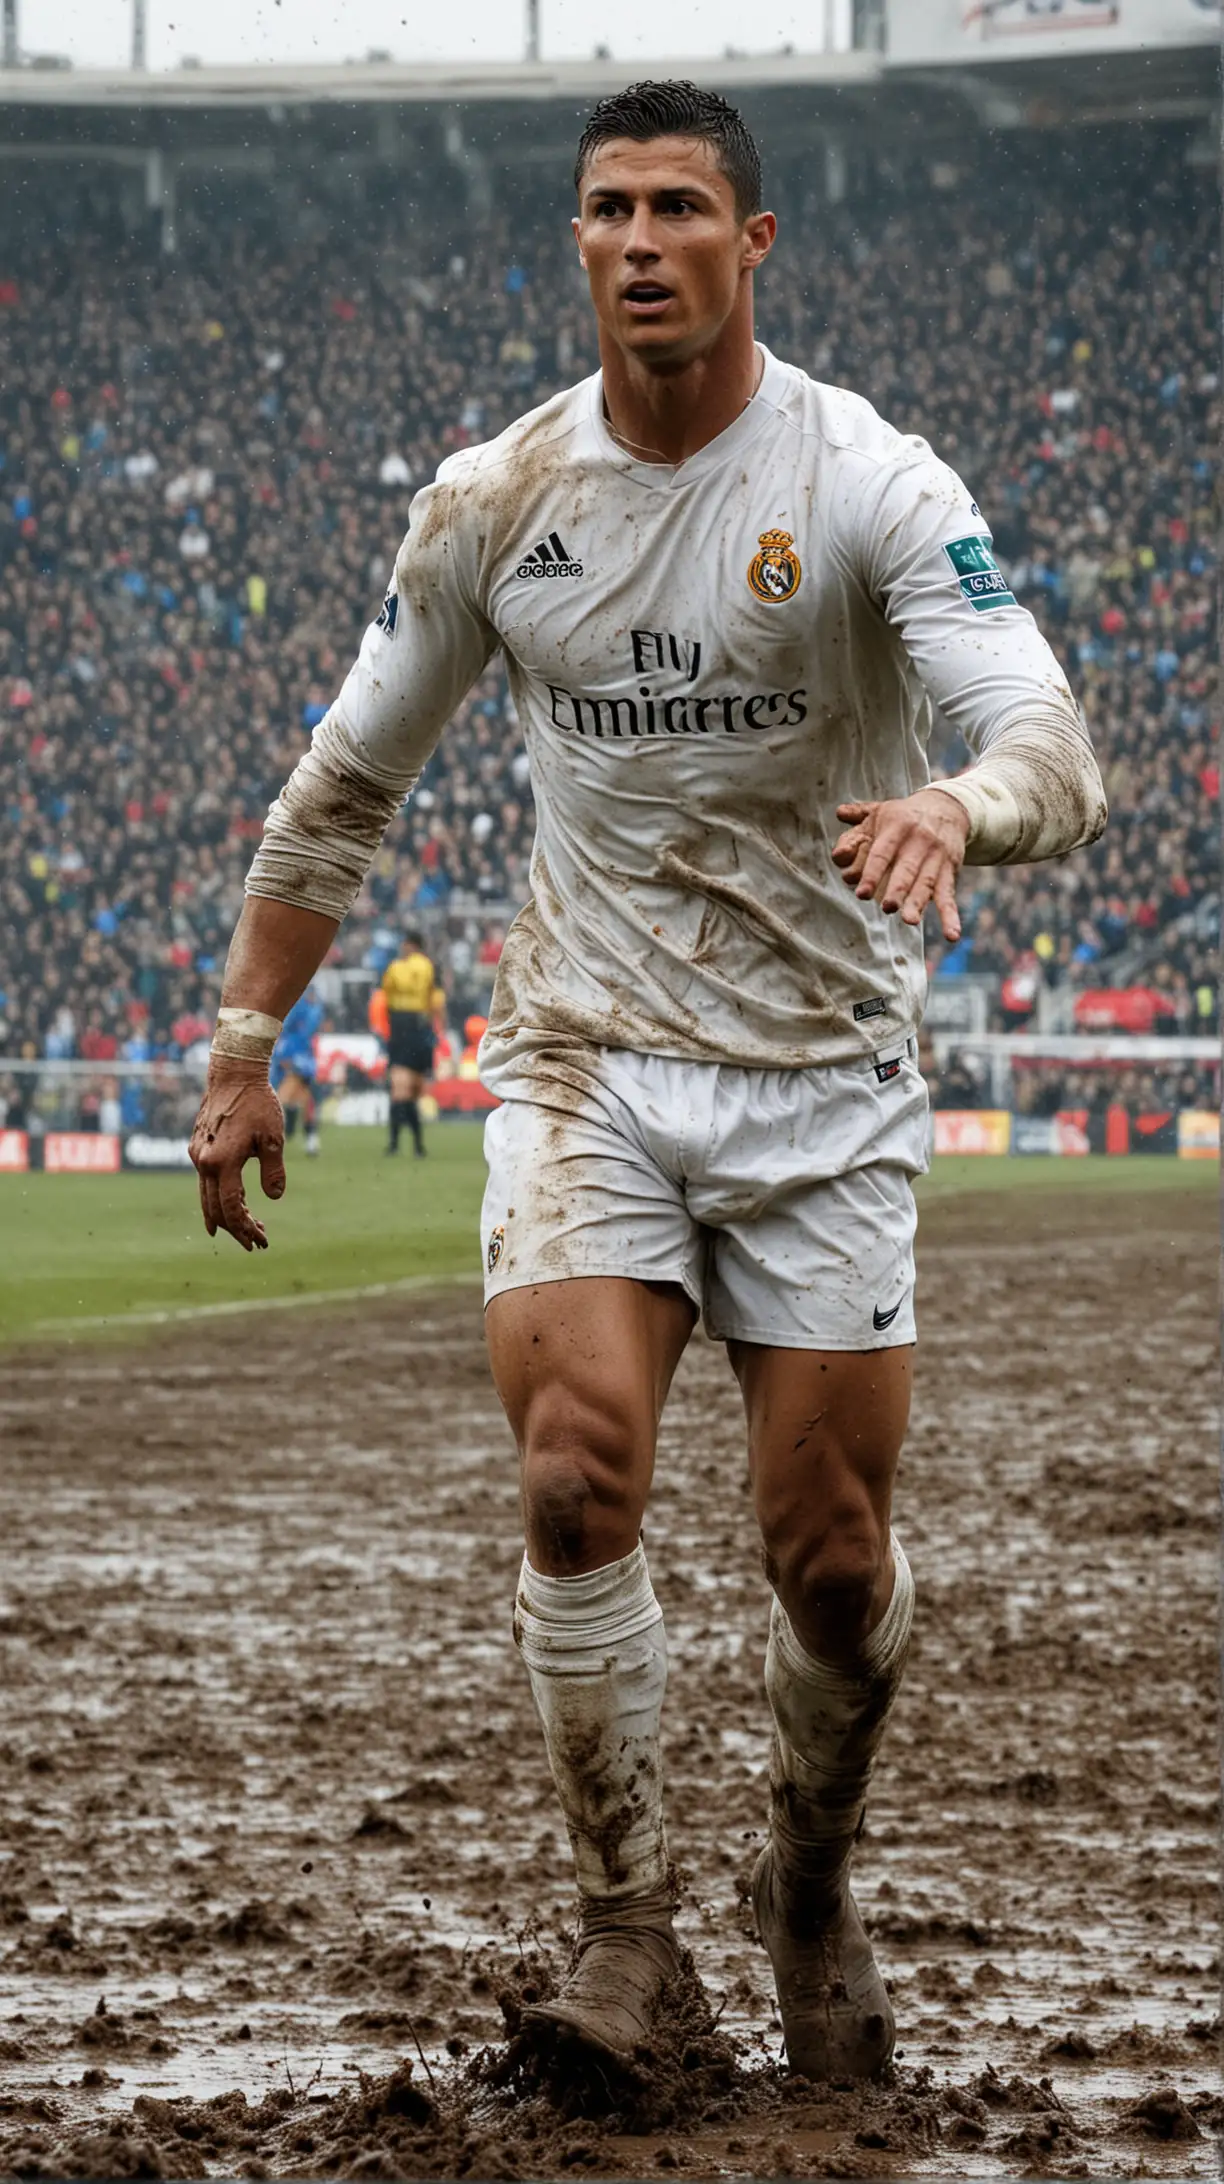 Cristiano Ronaldo is playing rugby in the muddy ground, lots of fans and stadium background 